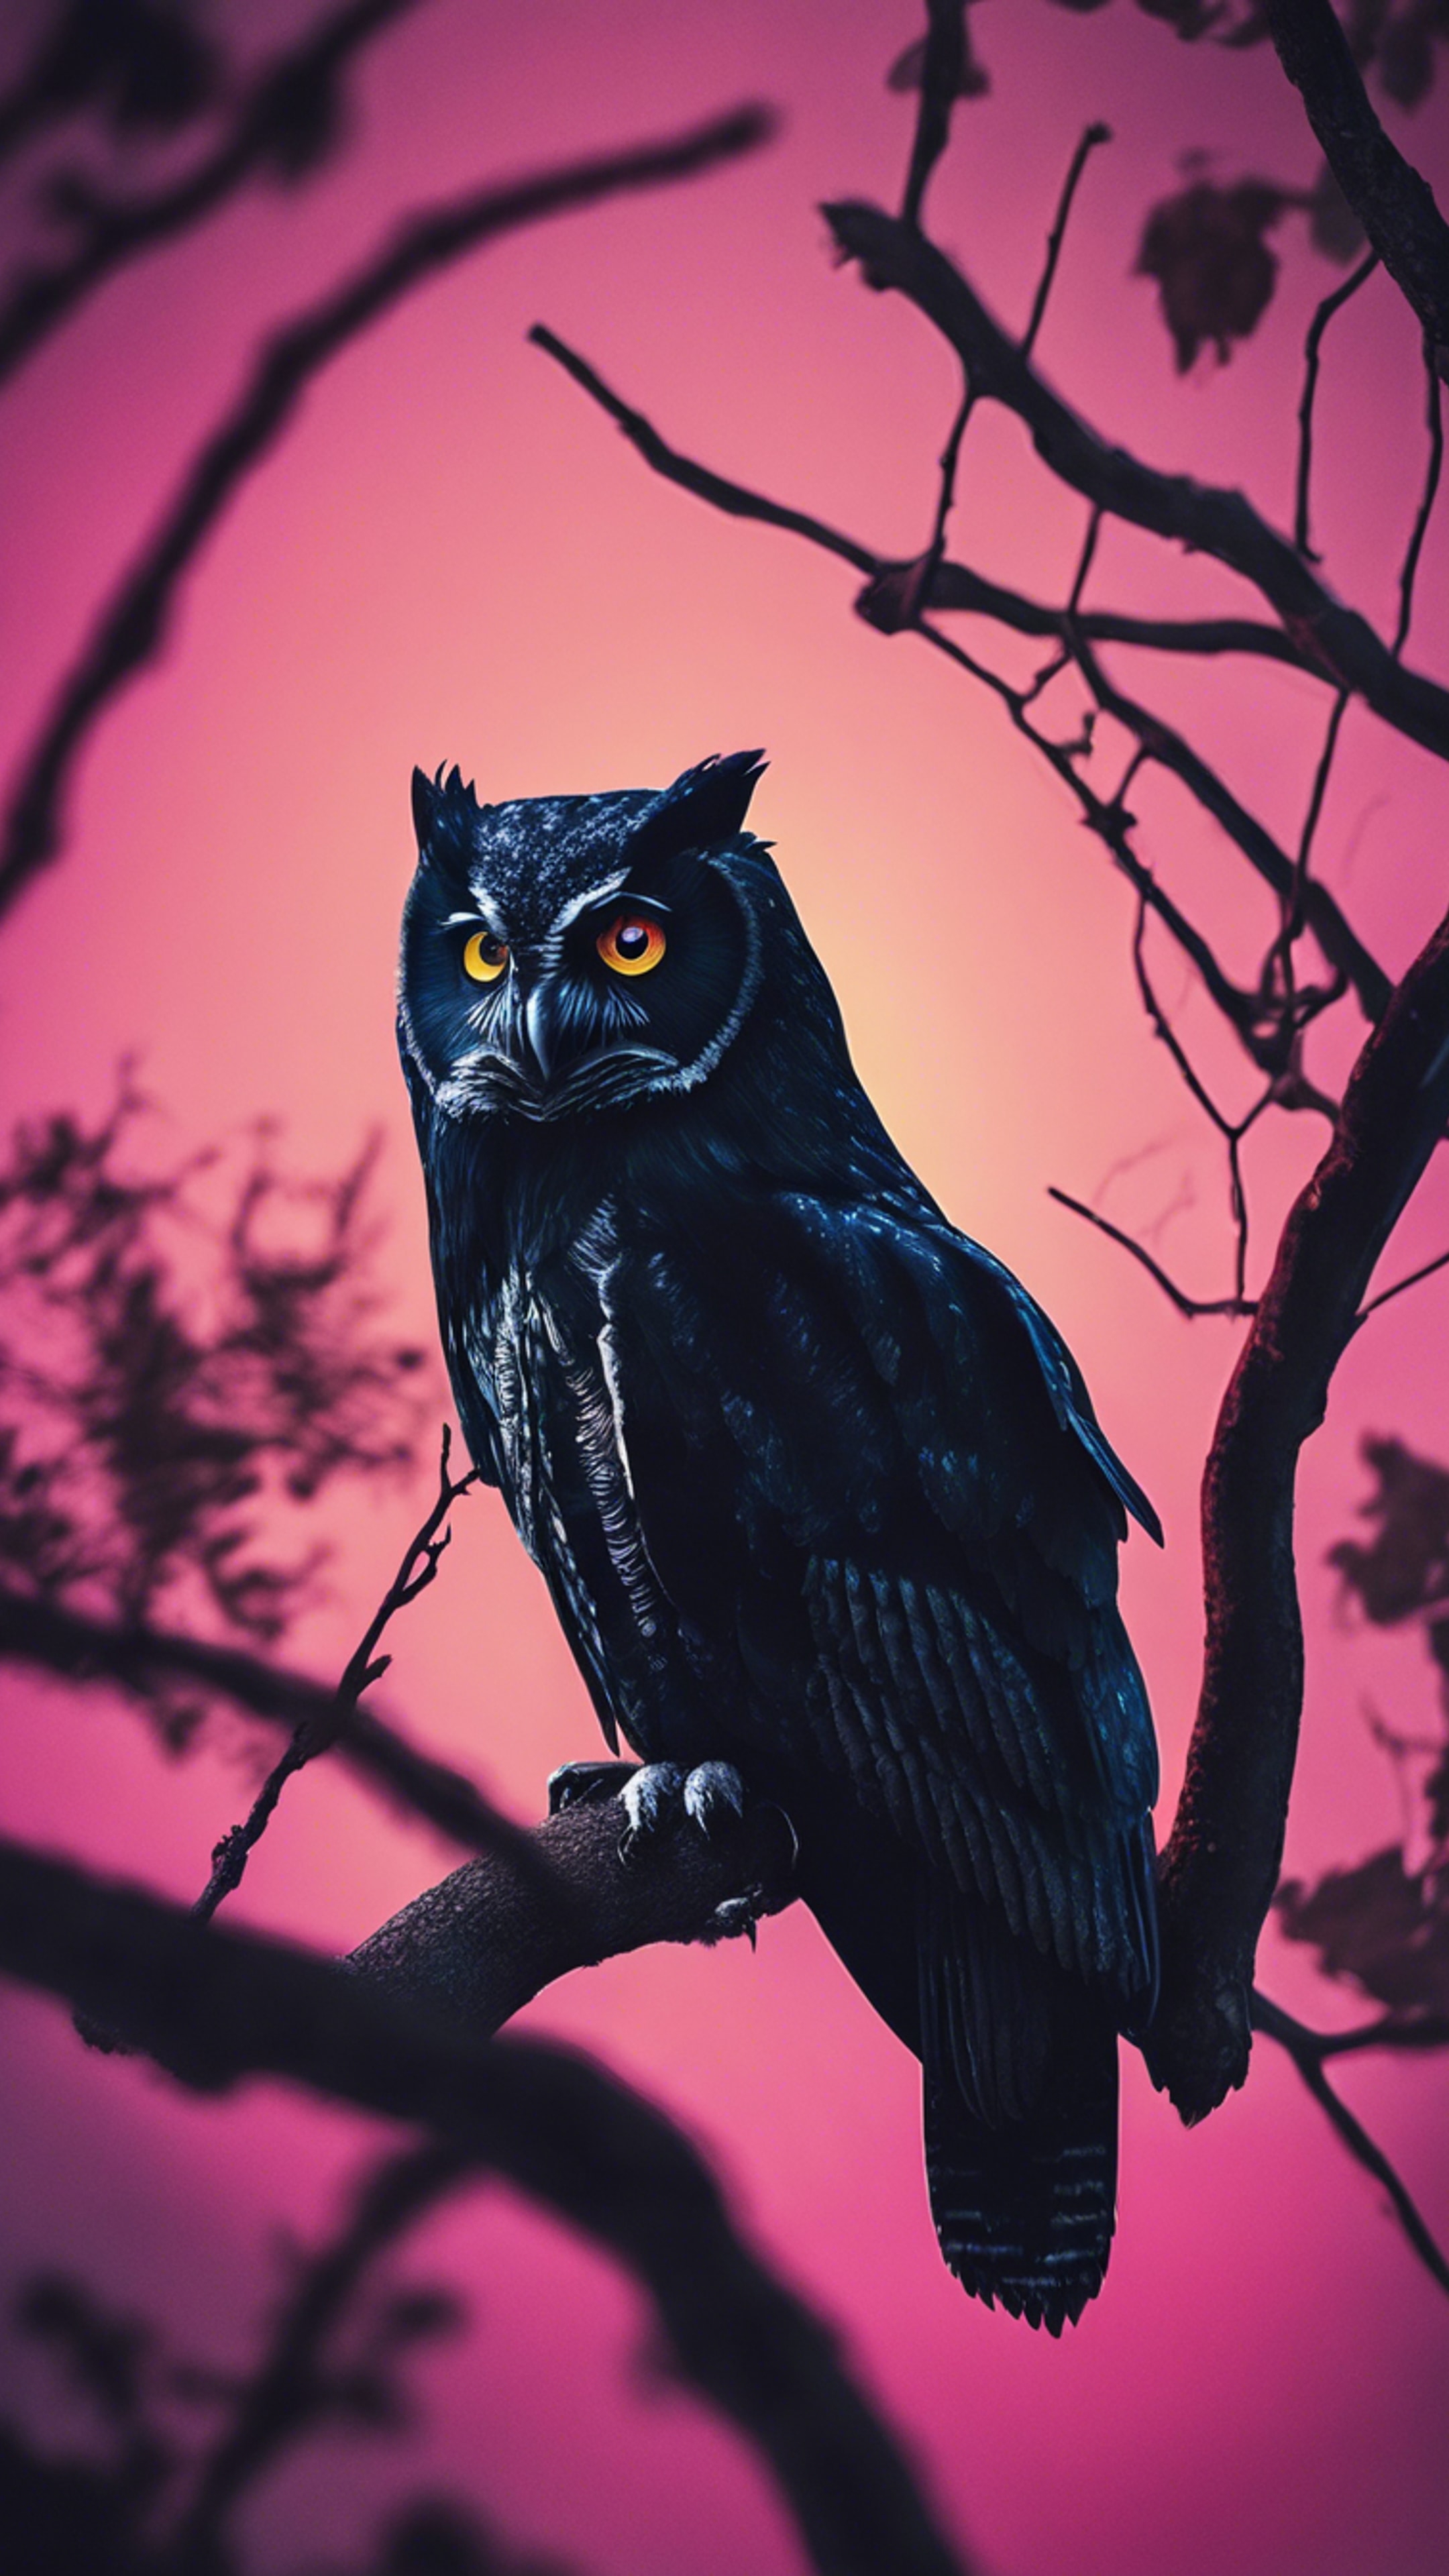 A pitch black owl, its eyes glowing in cool neon colors, perched on a tree branch on a moonless night. ផ្ទាំង​រូបភាព[de9c9fccdafb4c81814c]